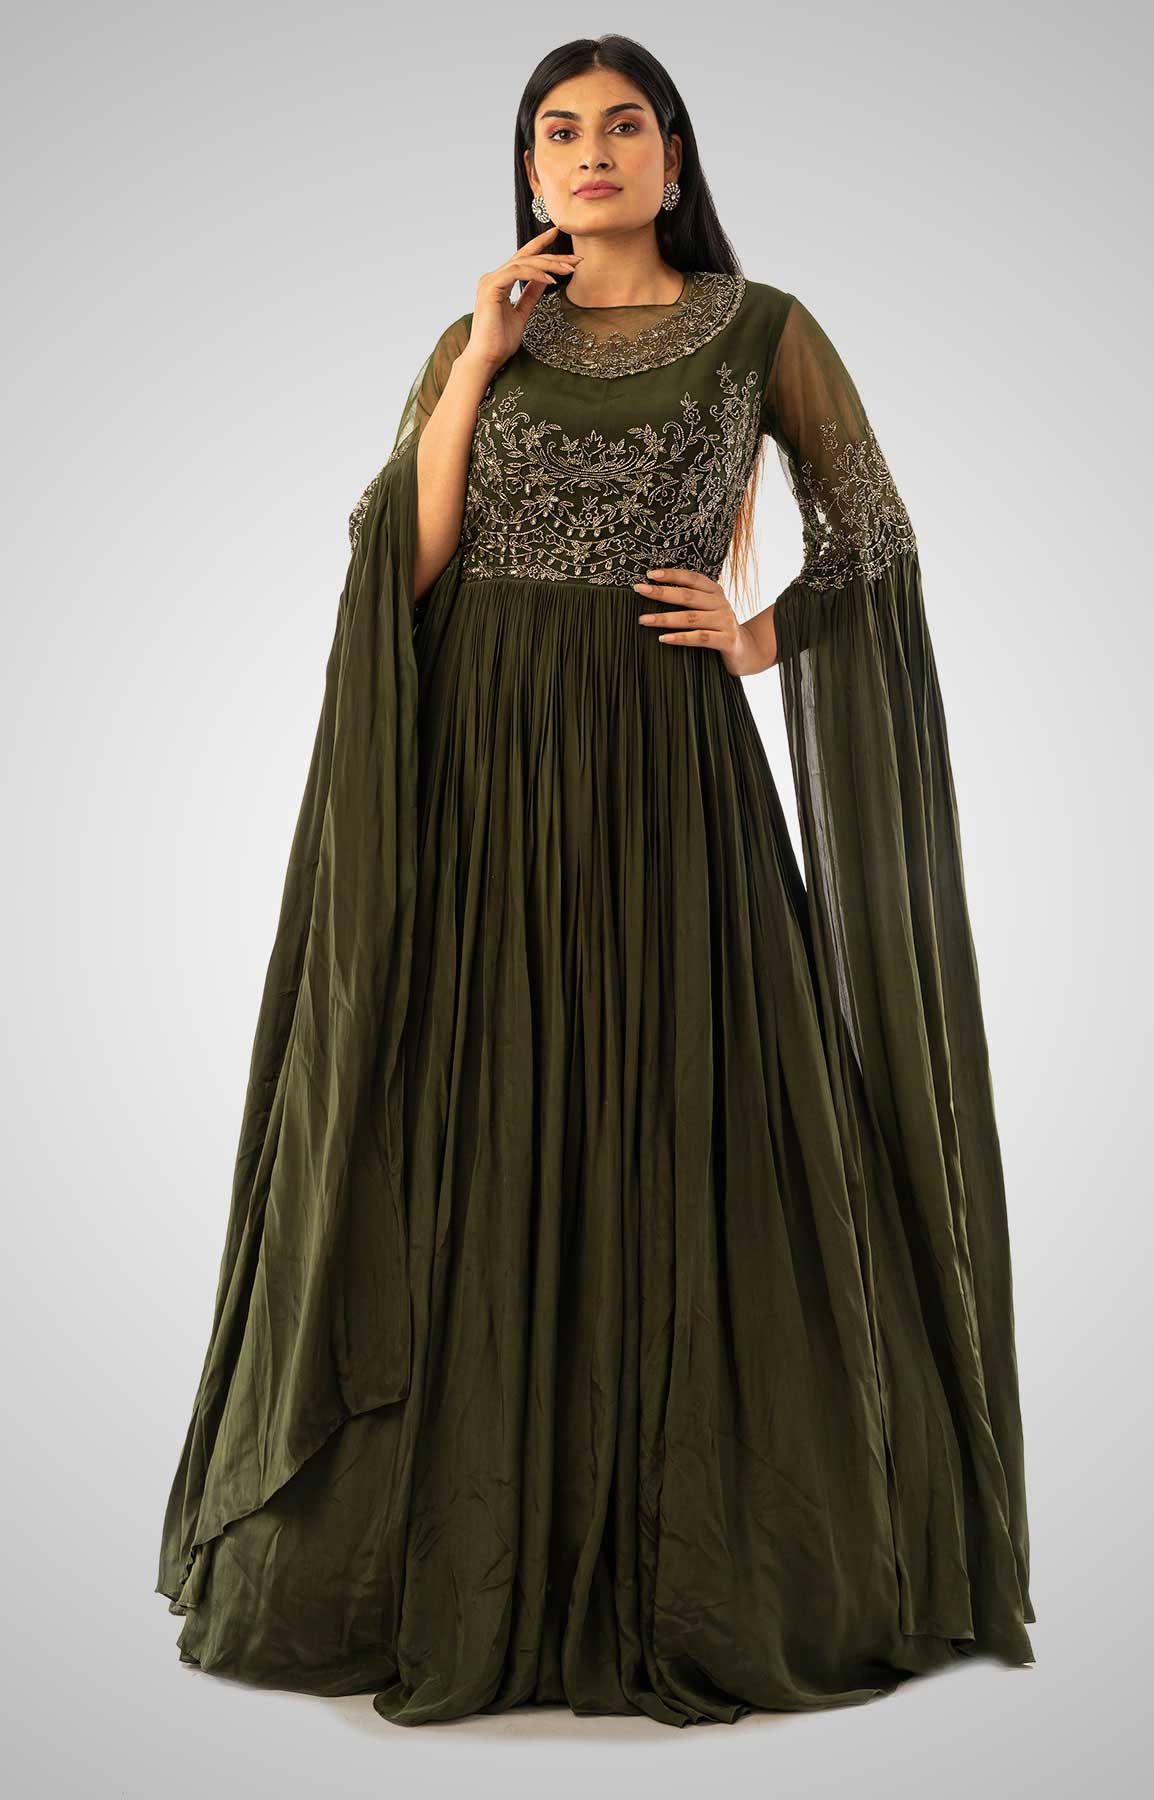 Olive Green Crepe Gown With Cape Style Sleeve And Embroidered Bodice – Viraaya By Ushnakmals